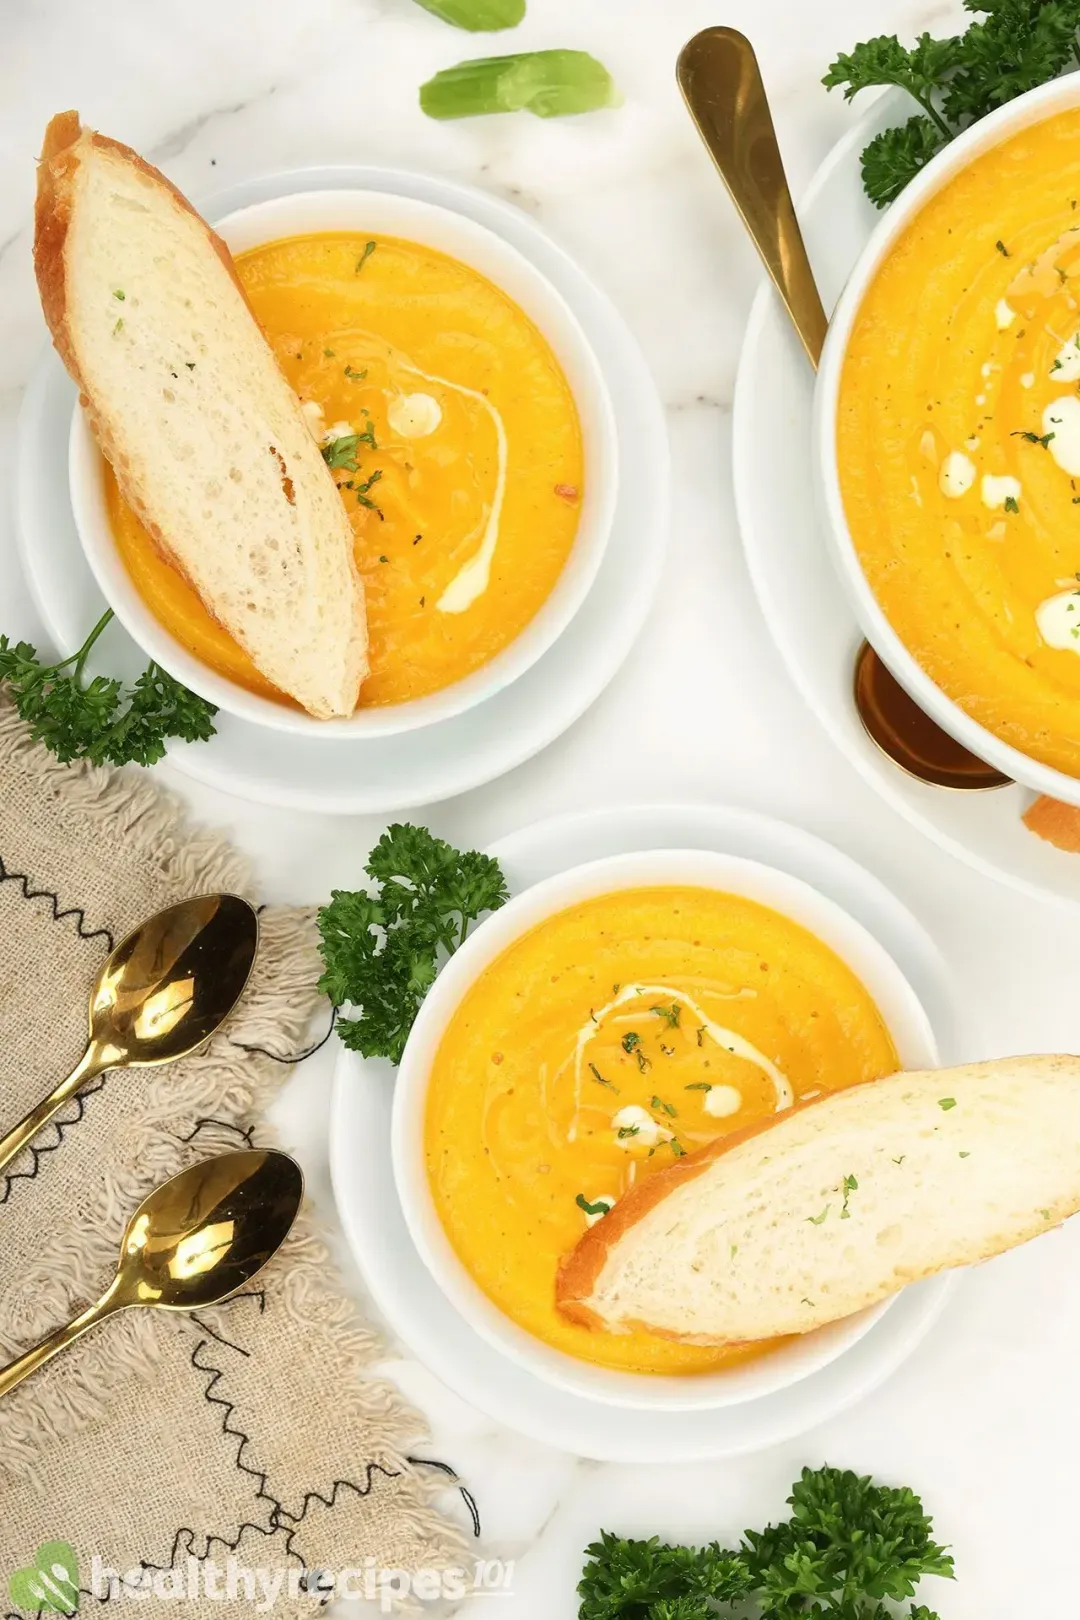 Storage and Reheating Carrot Soup